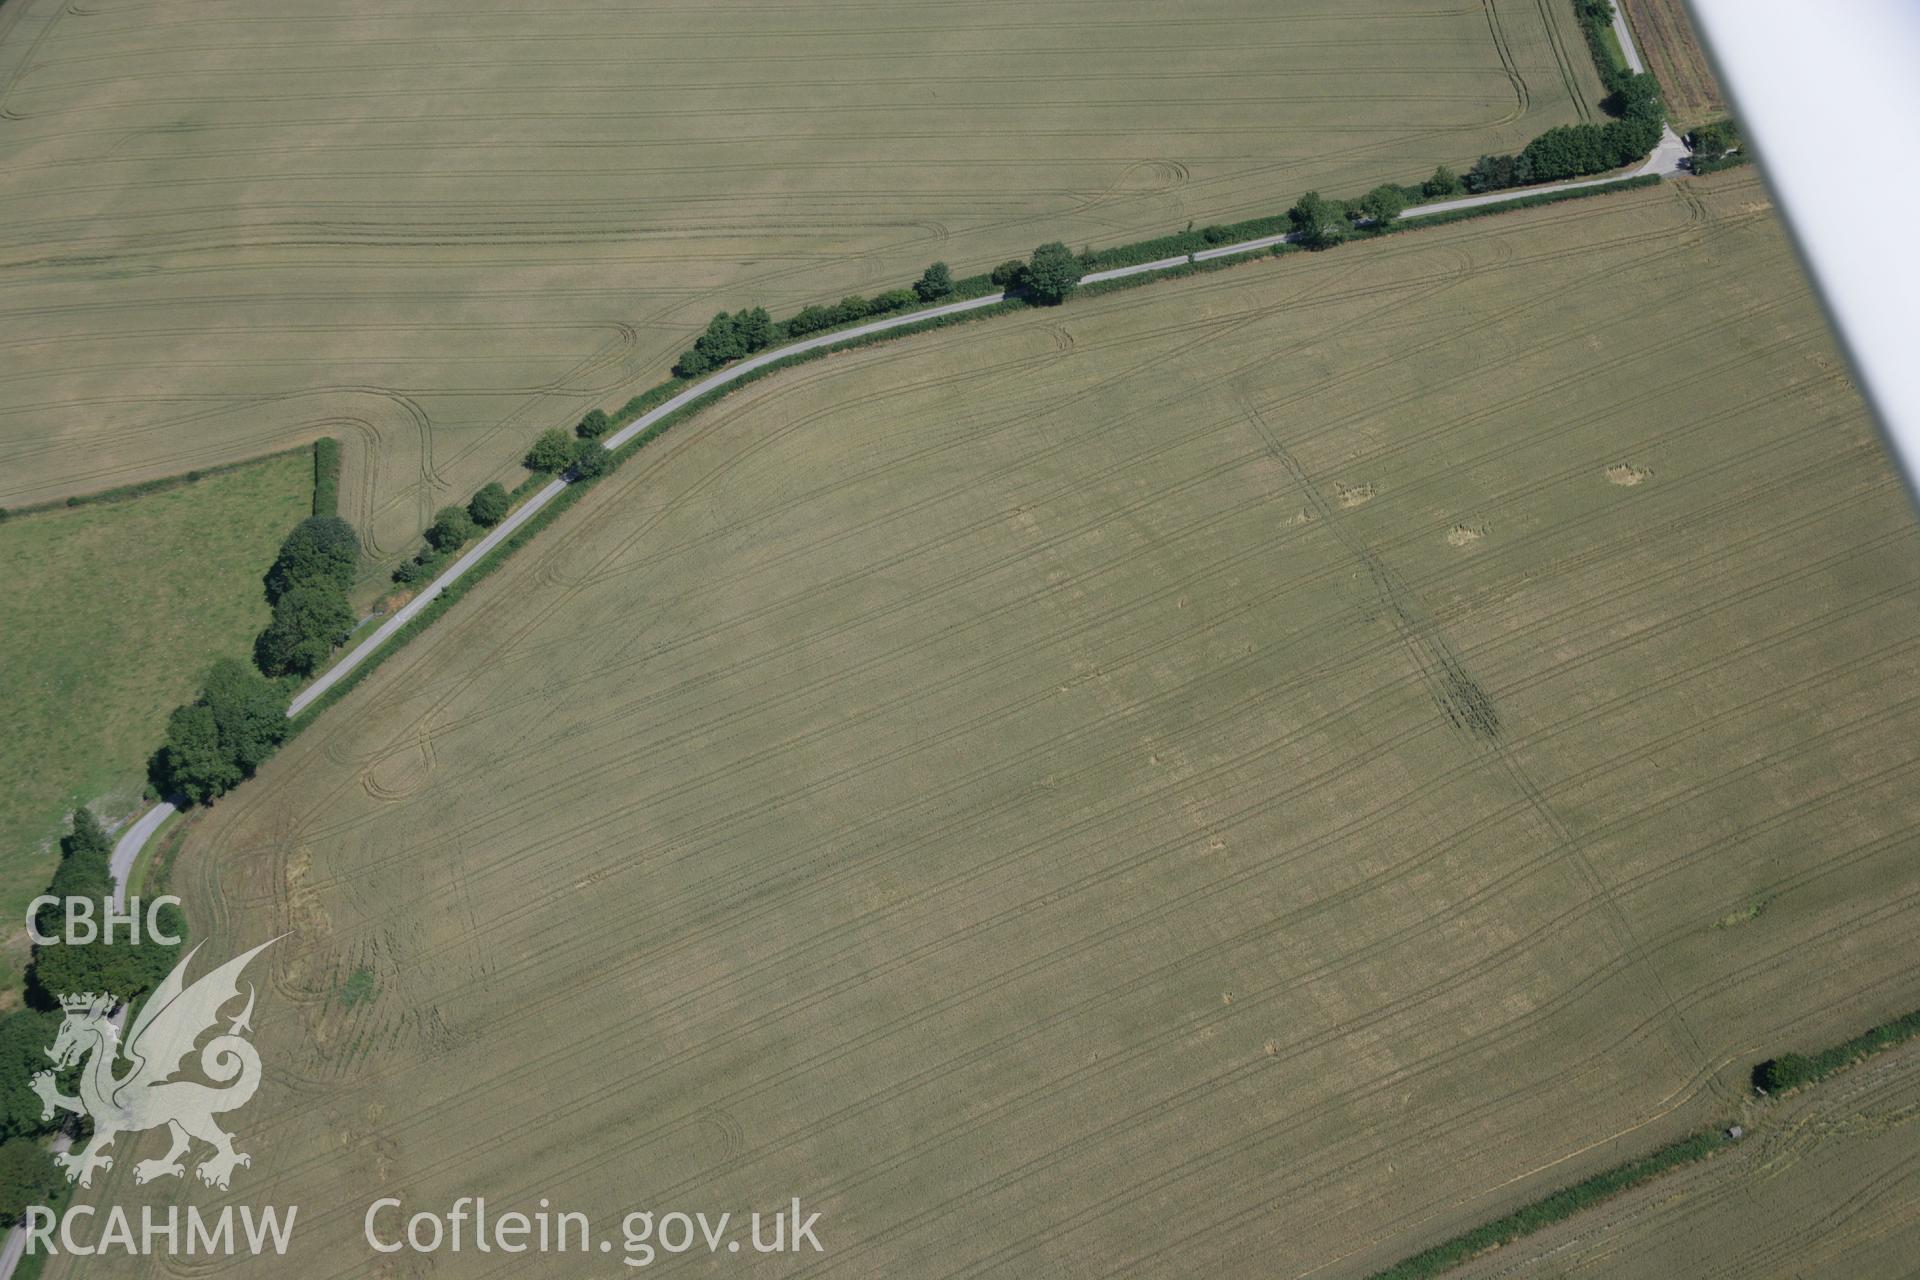 RCAHMW colour oblique aerial photograph of Cawrence Cropmark Enclosure. Taken on 14 July 2006 by Toby Driver.